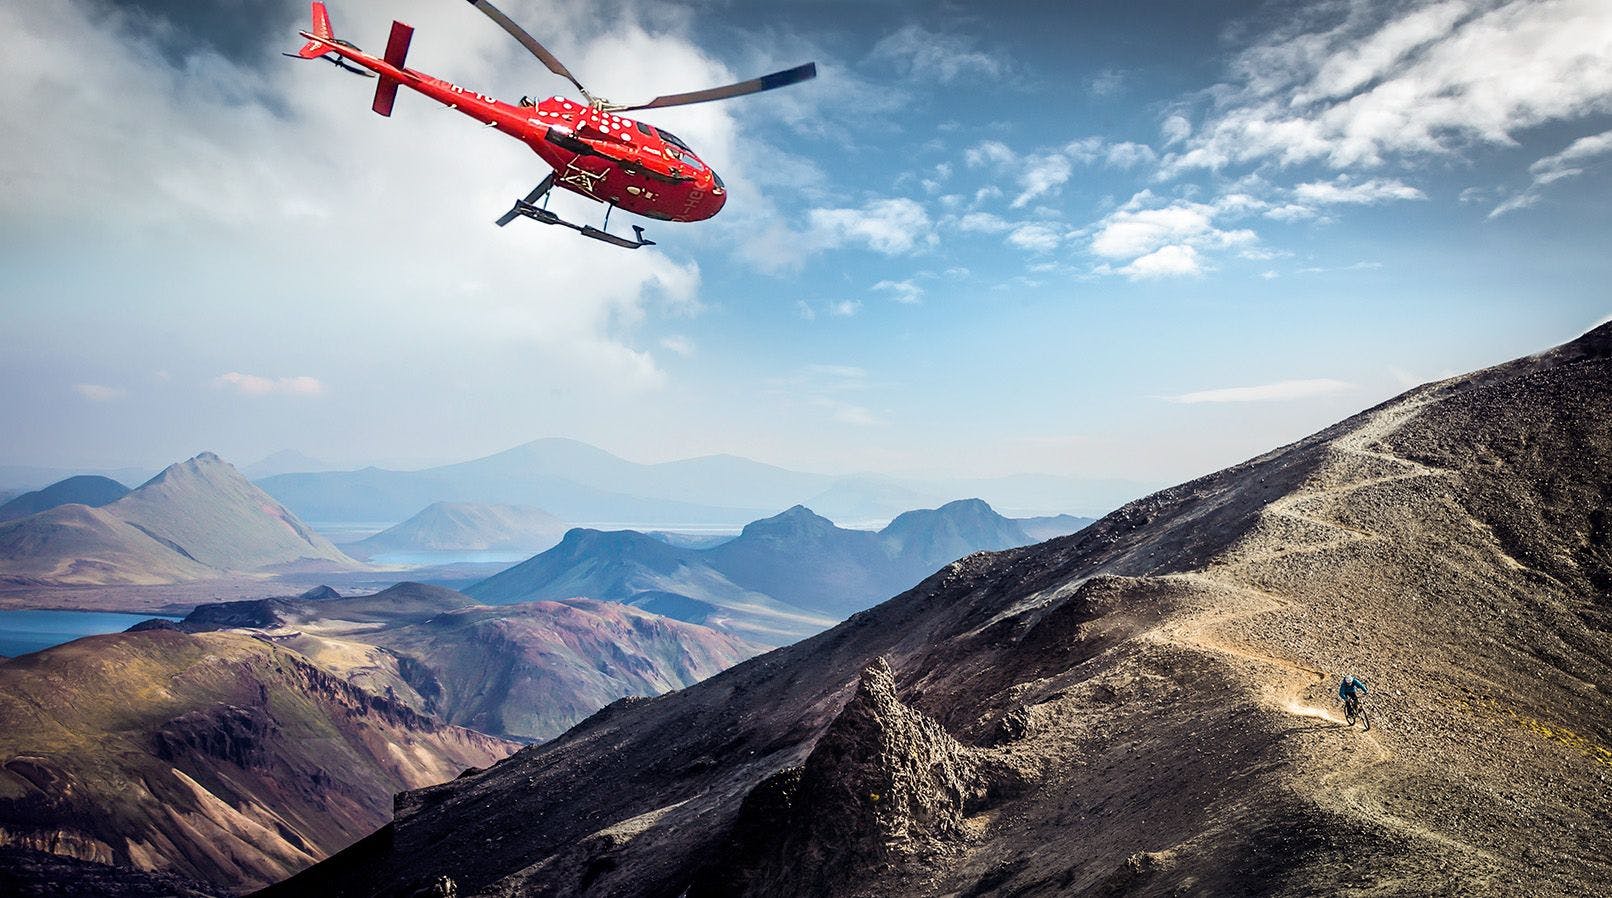 Helicopter flying over a mountain range